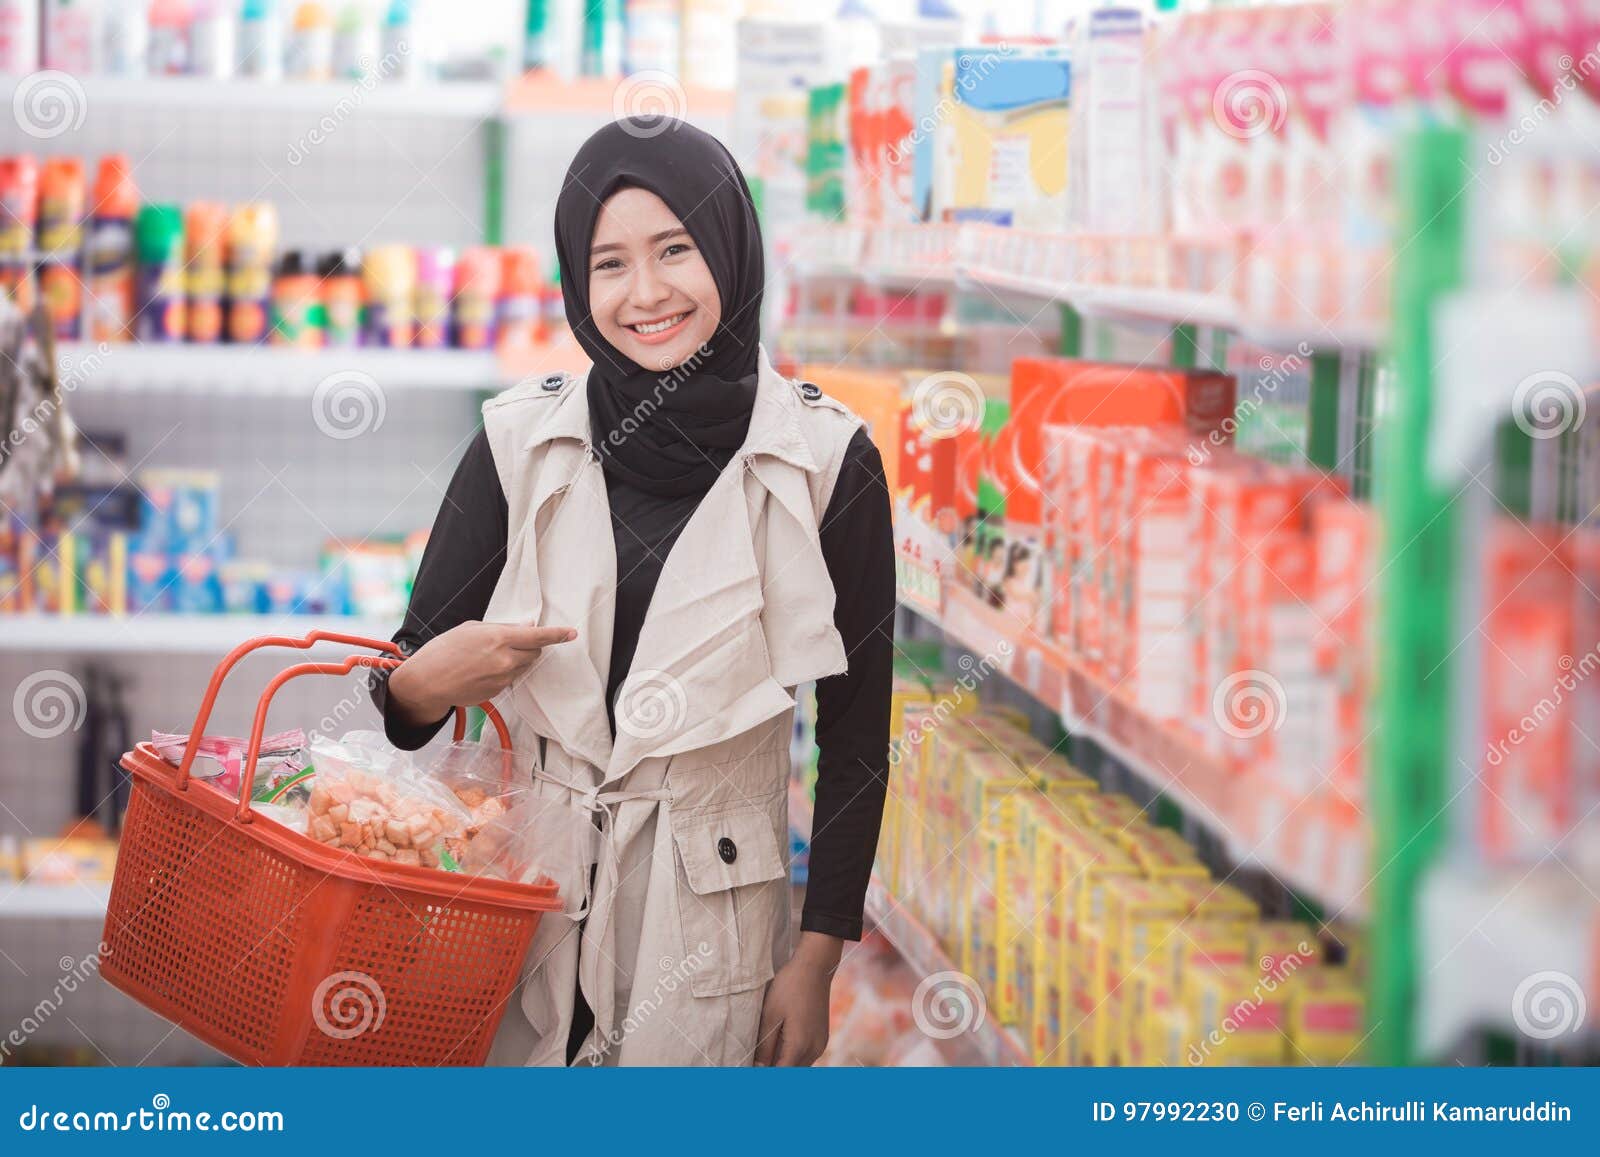 muslim woman buying some halal product